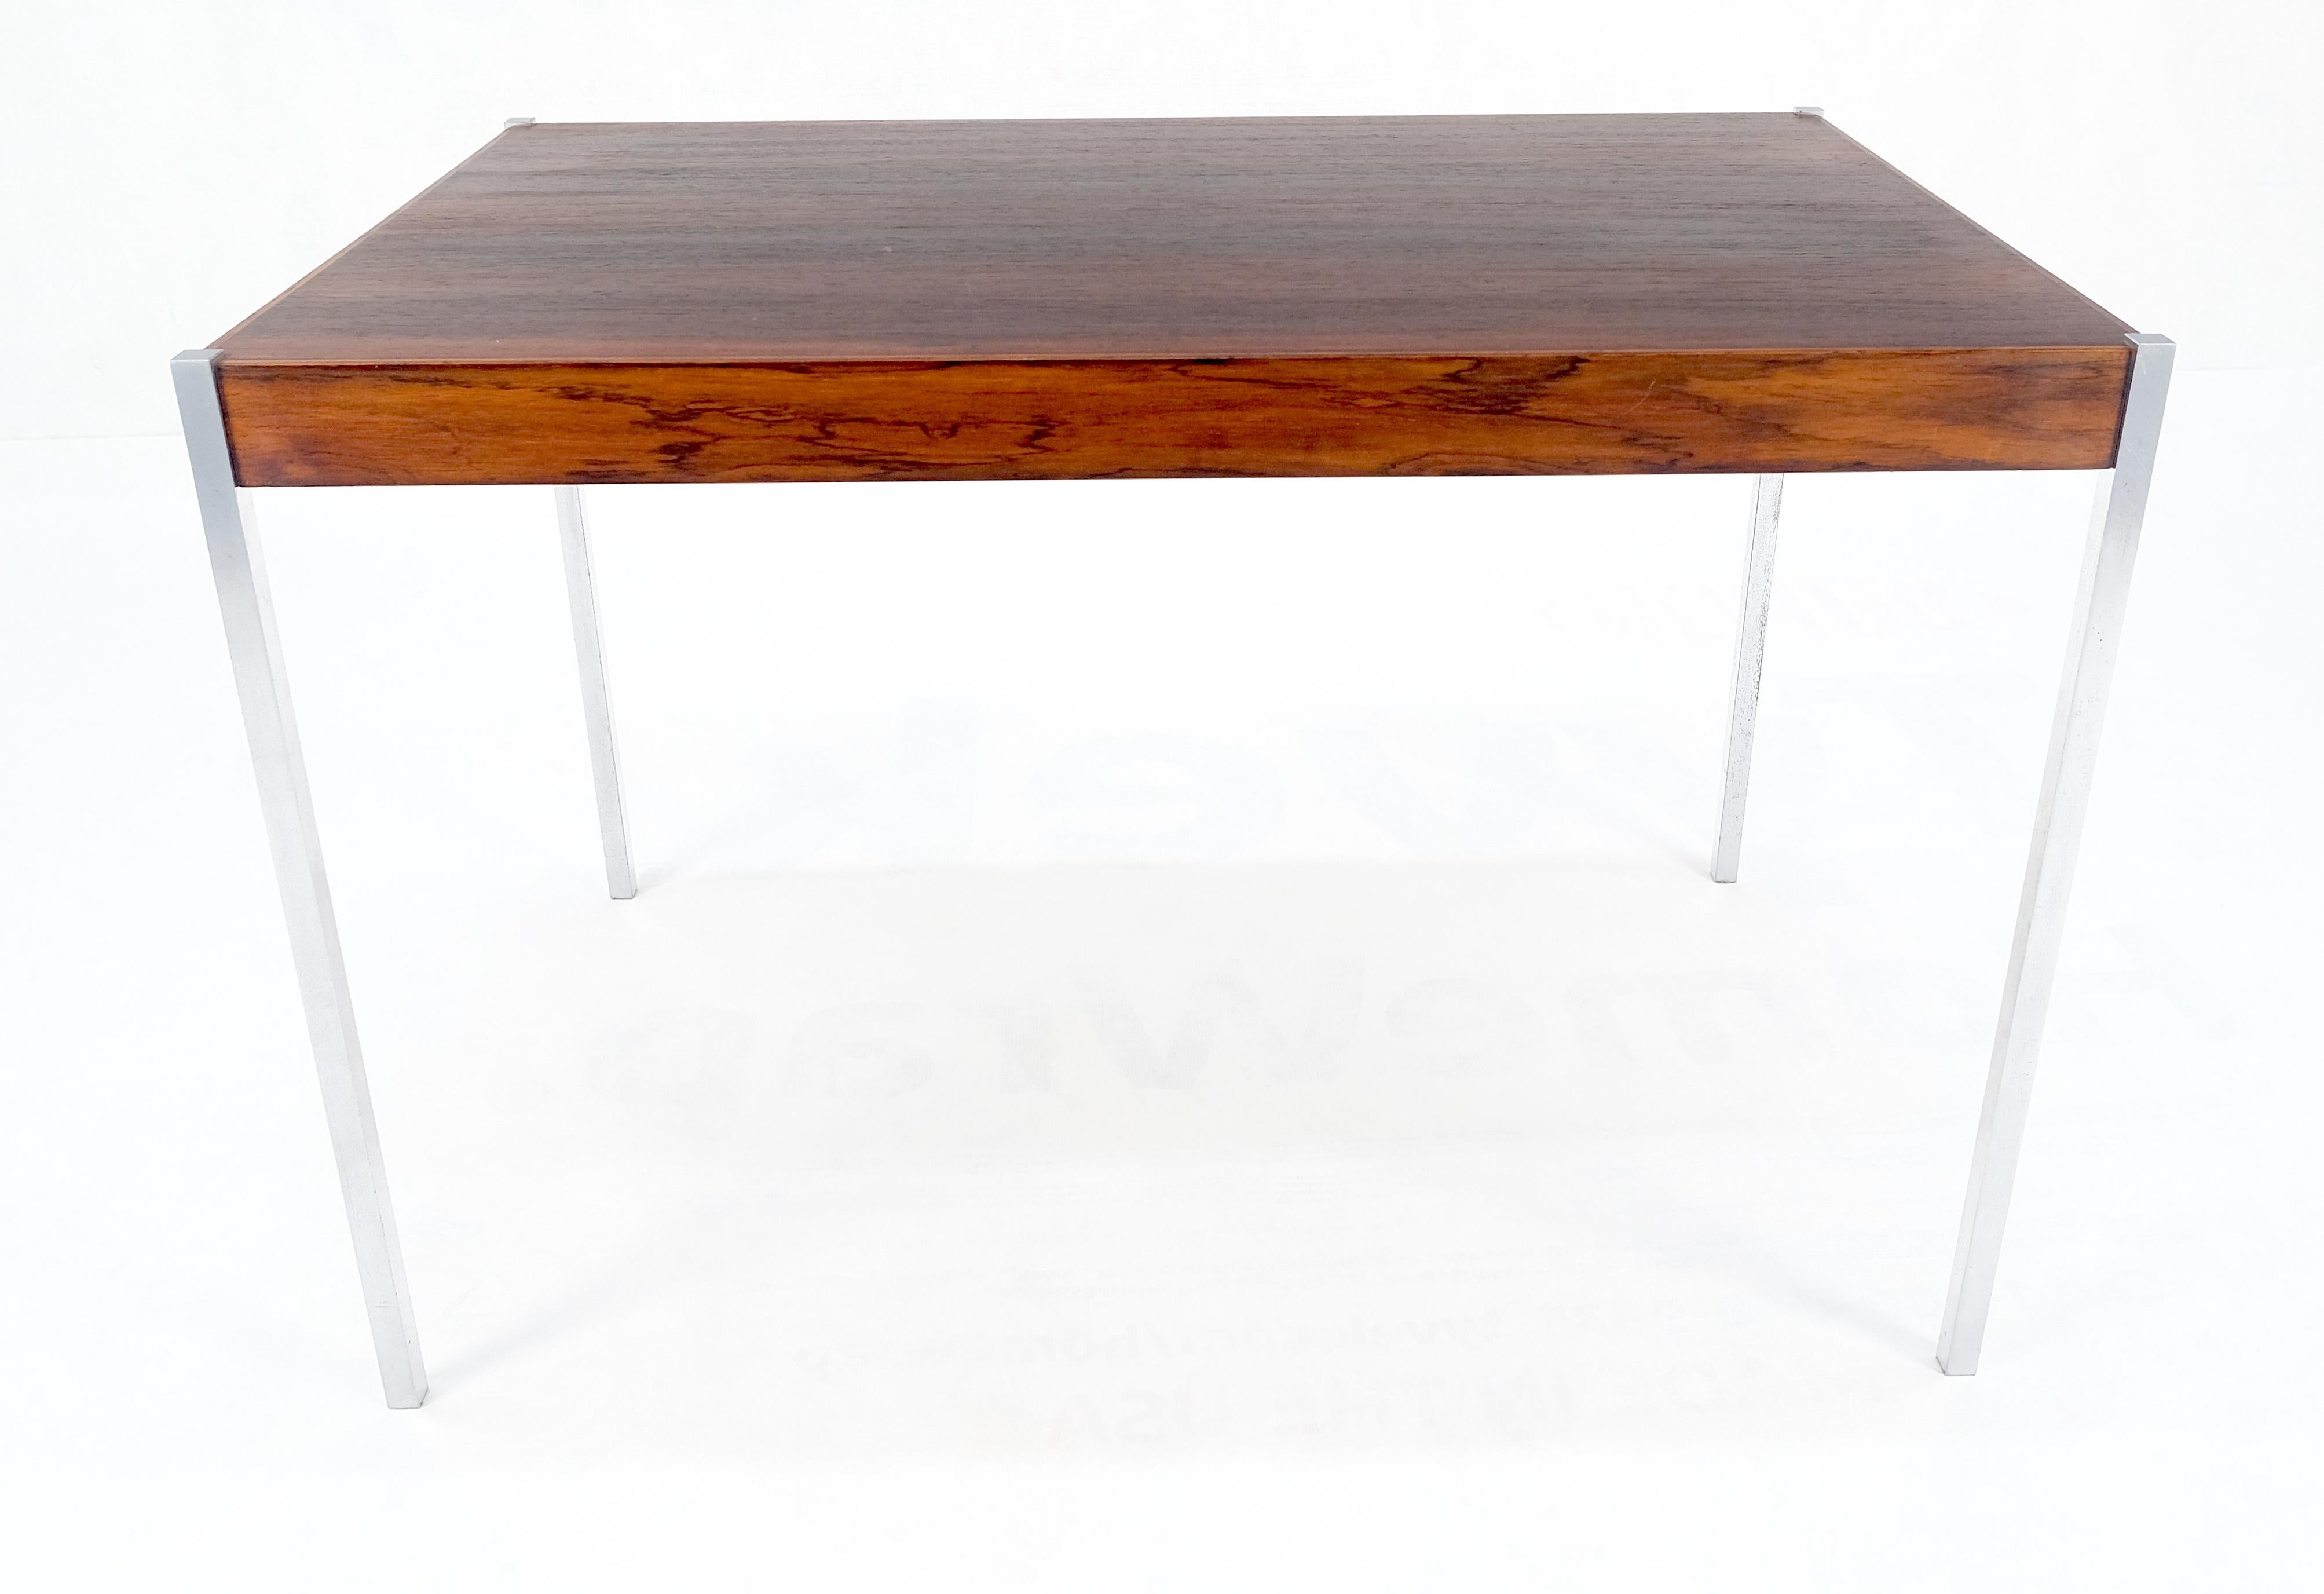 Danish Mid-Century Modern Occasional Side End or Coffee Table in Rosewood In Excellent Condition For Sale In Rockaway, NJ